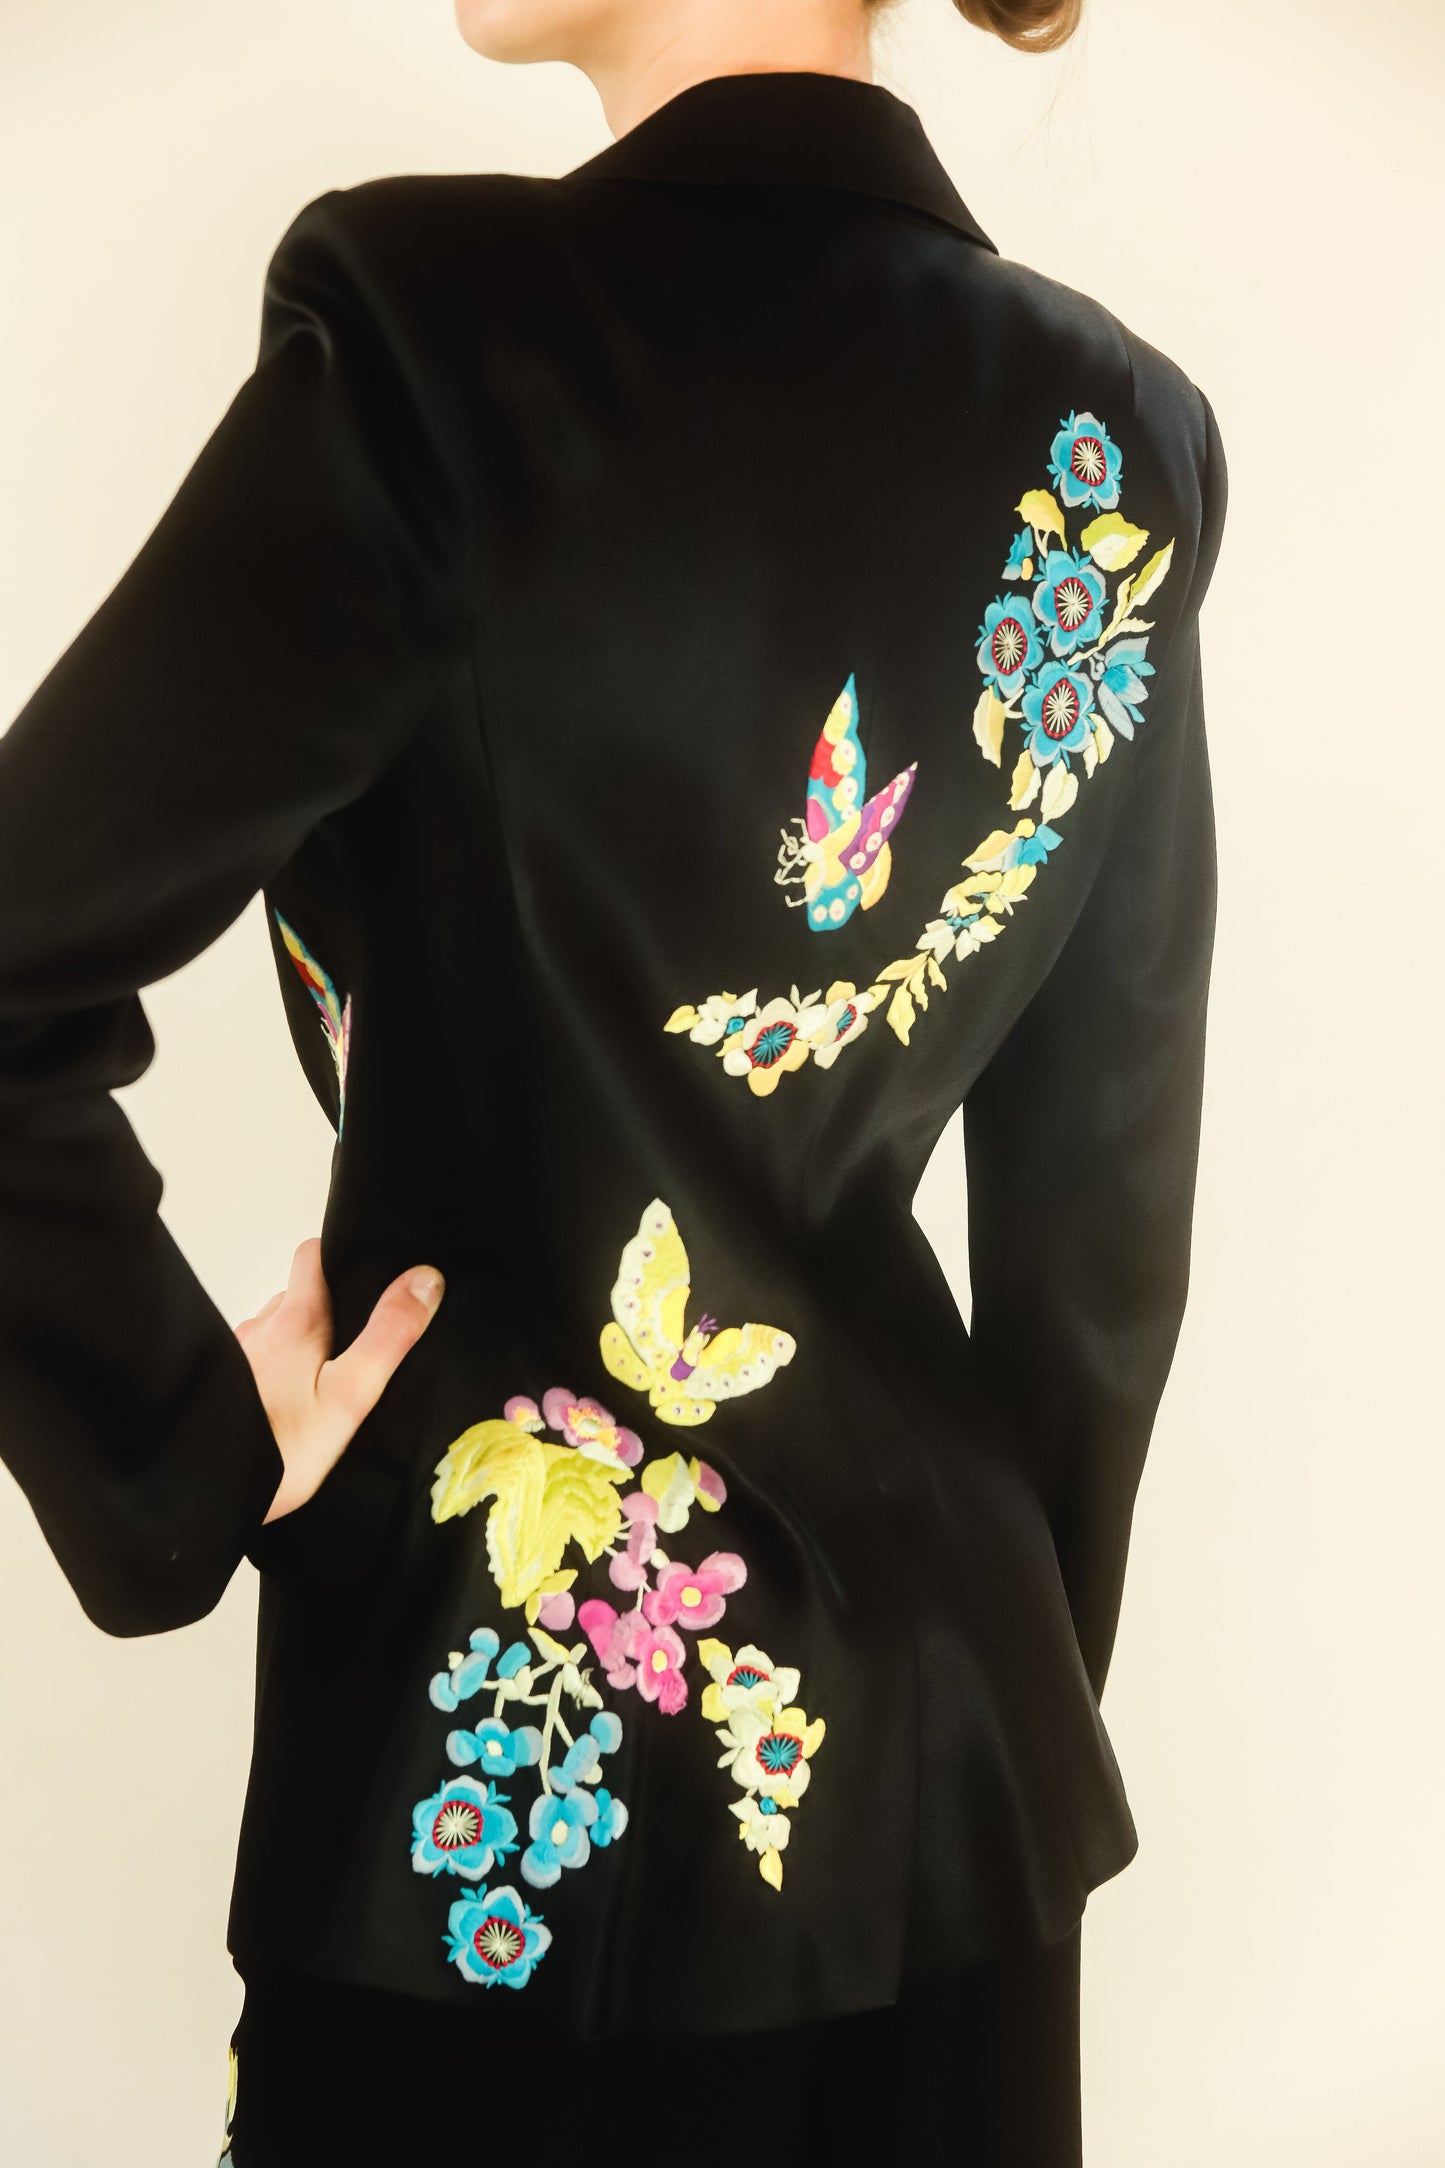 John Galliano Embroidered Butterfly Suit